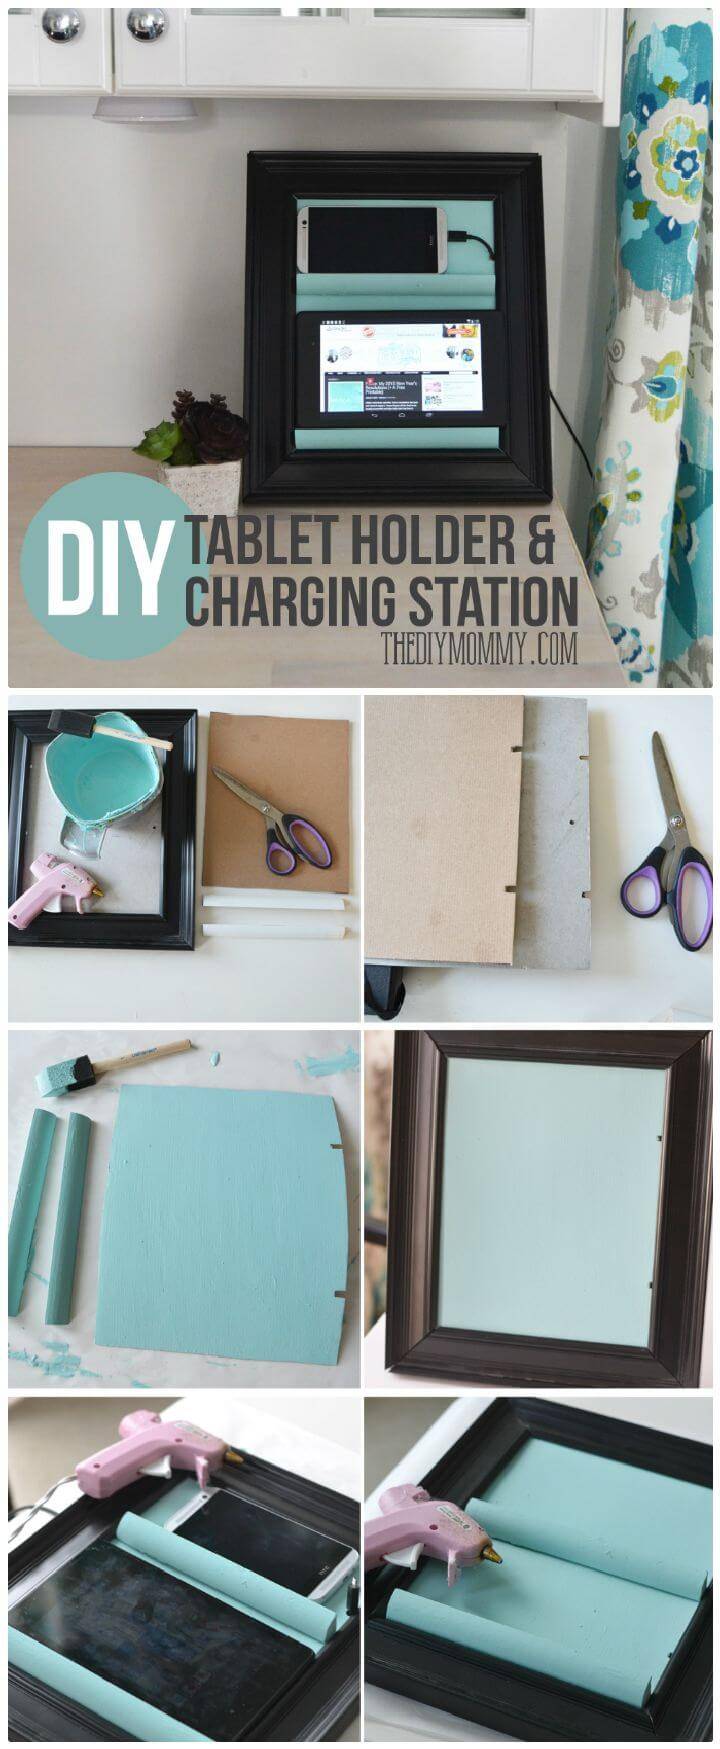 40 Best Diy Charging Station Ideas Easy Simple Unique Diy Crafts,Best Bright Color Combinations